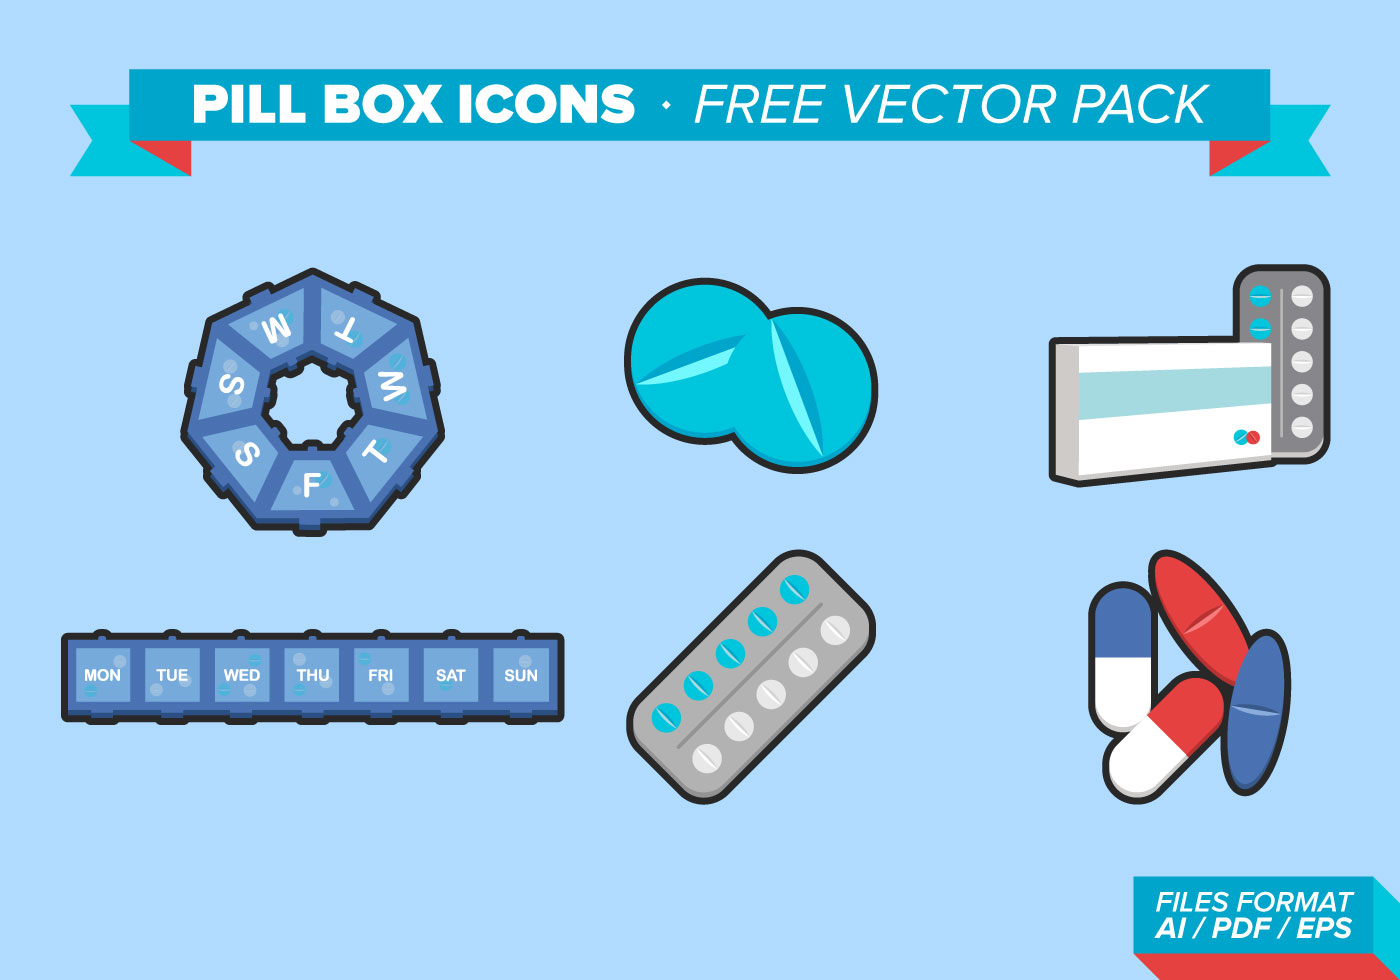 Download Pill Box Icons Free Vector Pack - Download Free Vectors ...